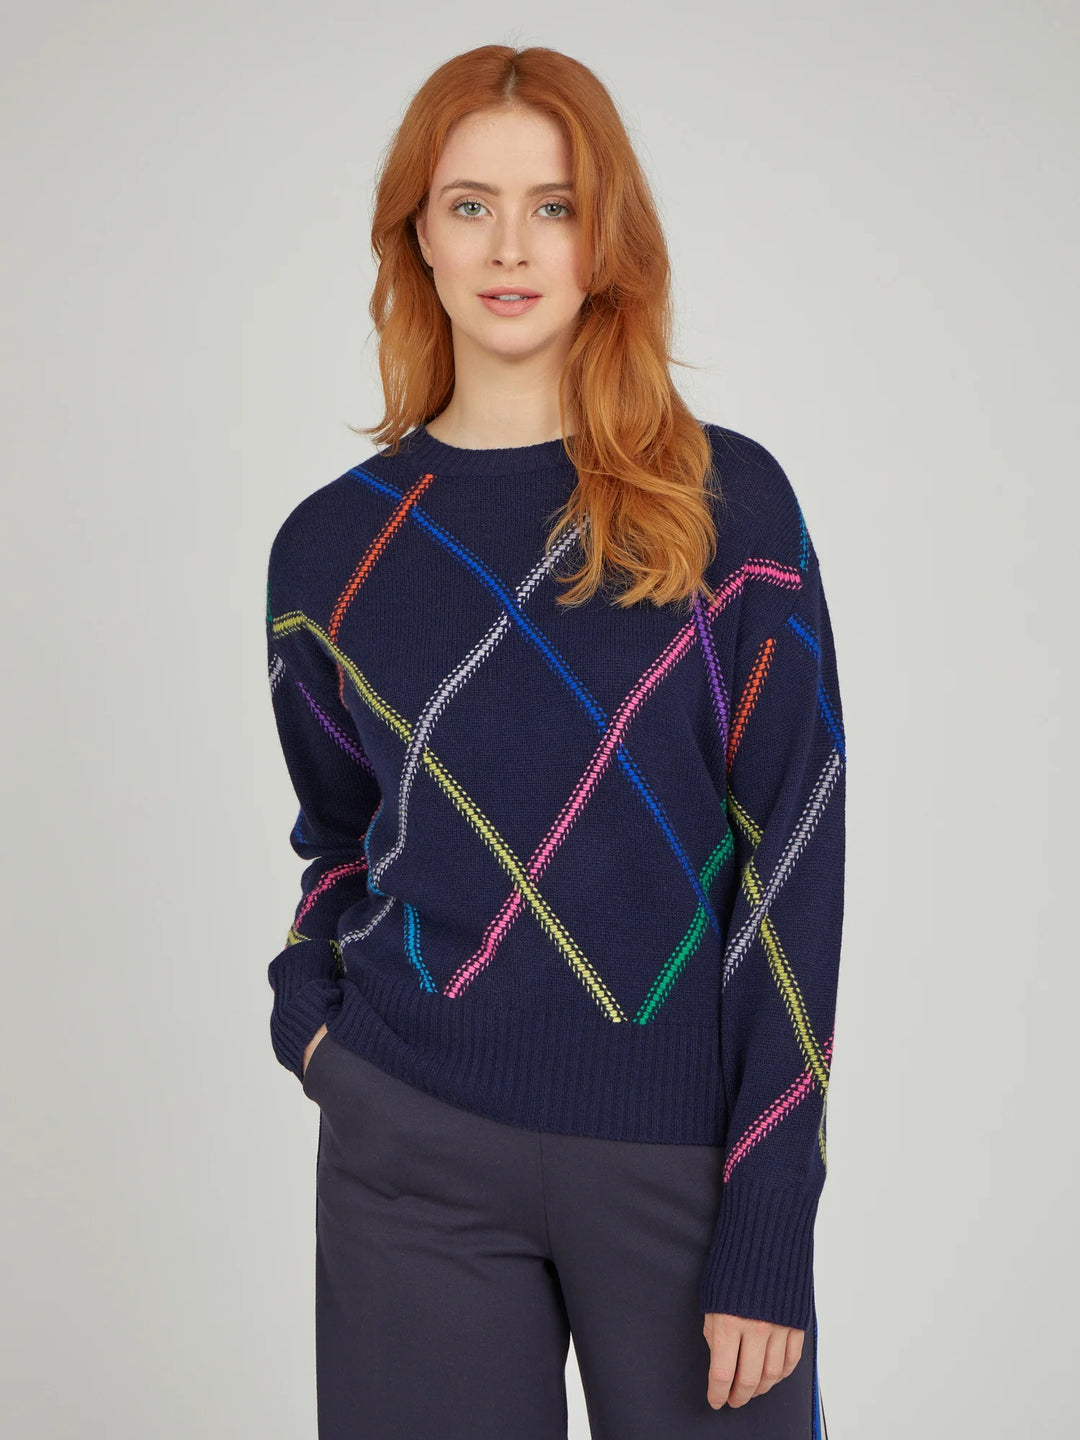 Cocoa Cashmere - The Plaid Crew Navy Multi is woven from luxurious cashmere, this plaid crew is a timeless essential with a modern twist.